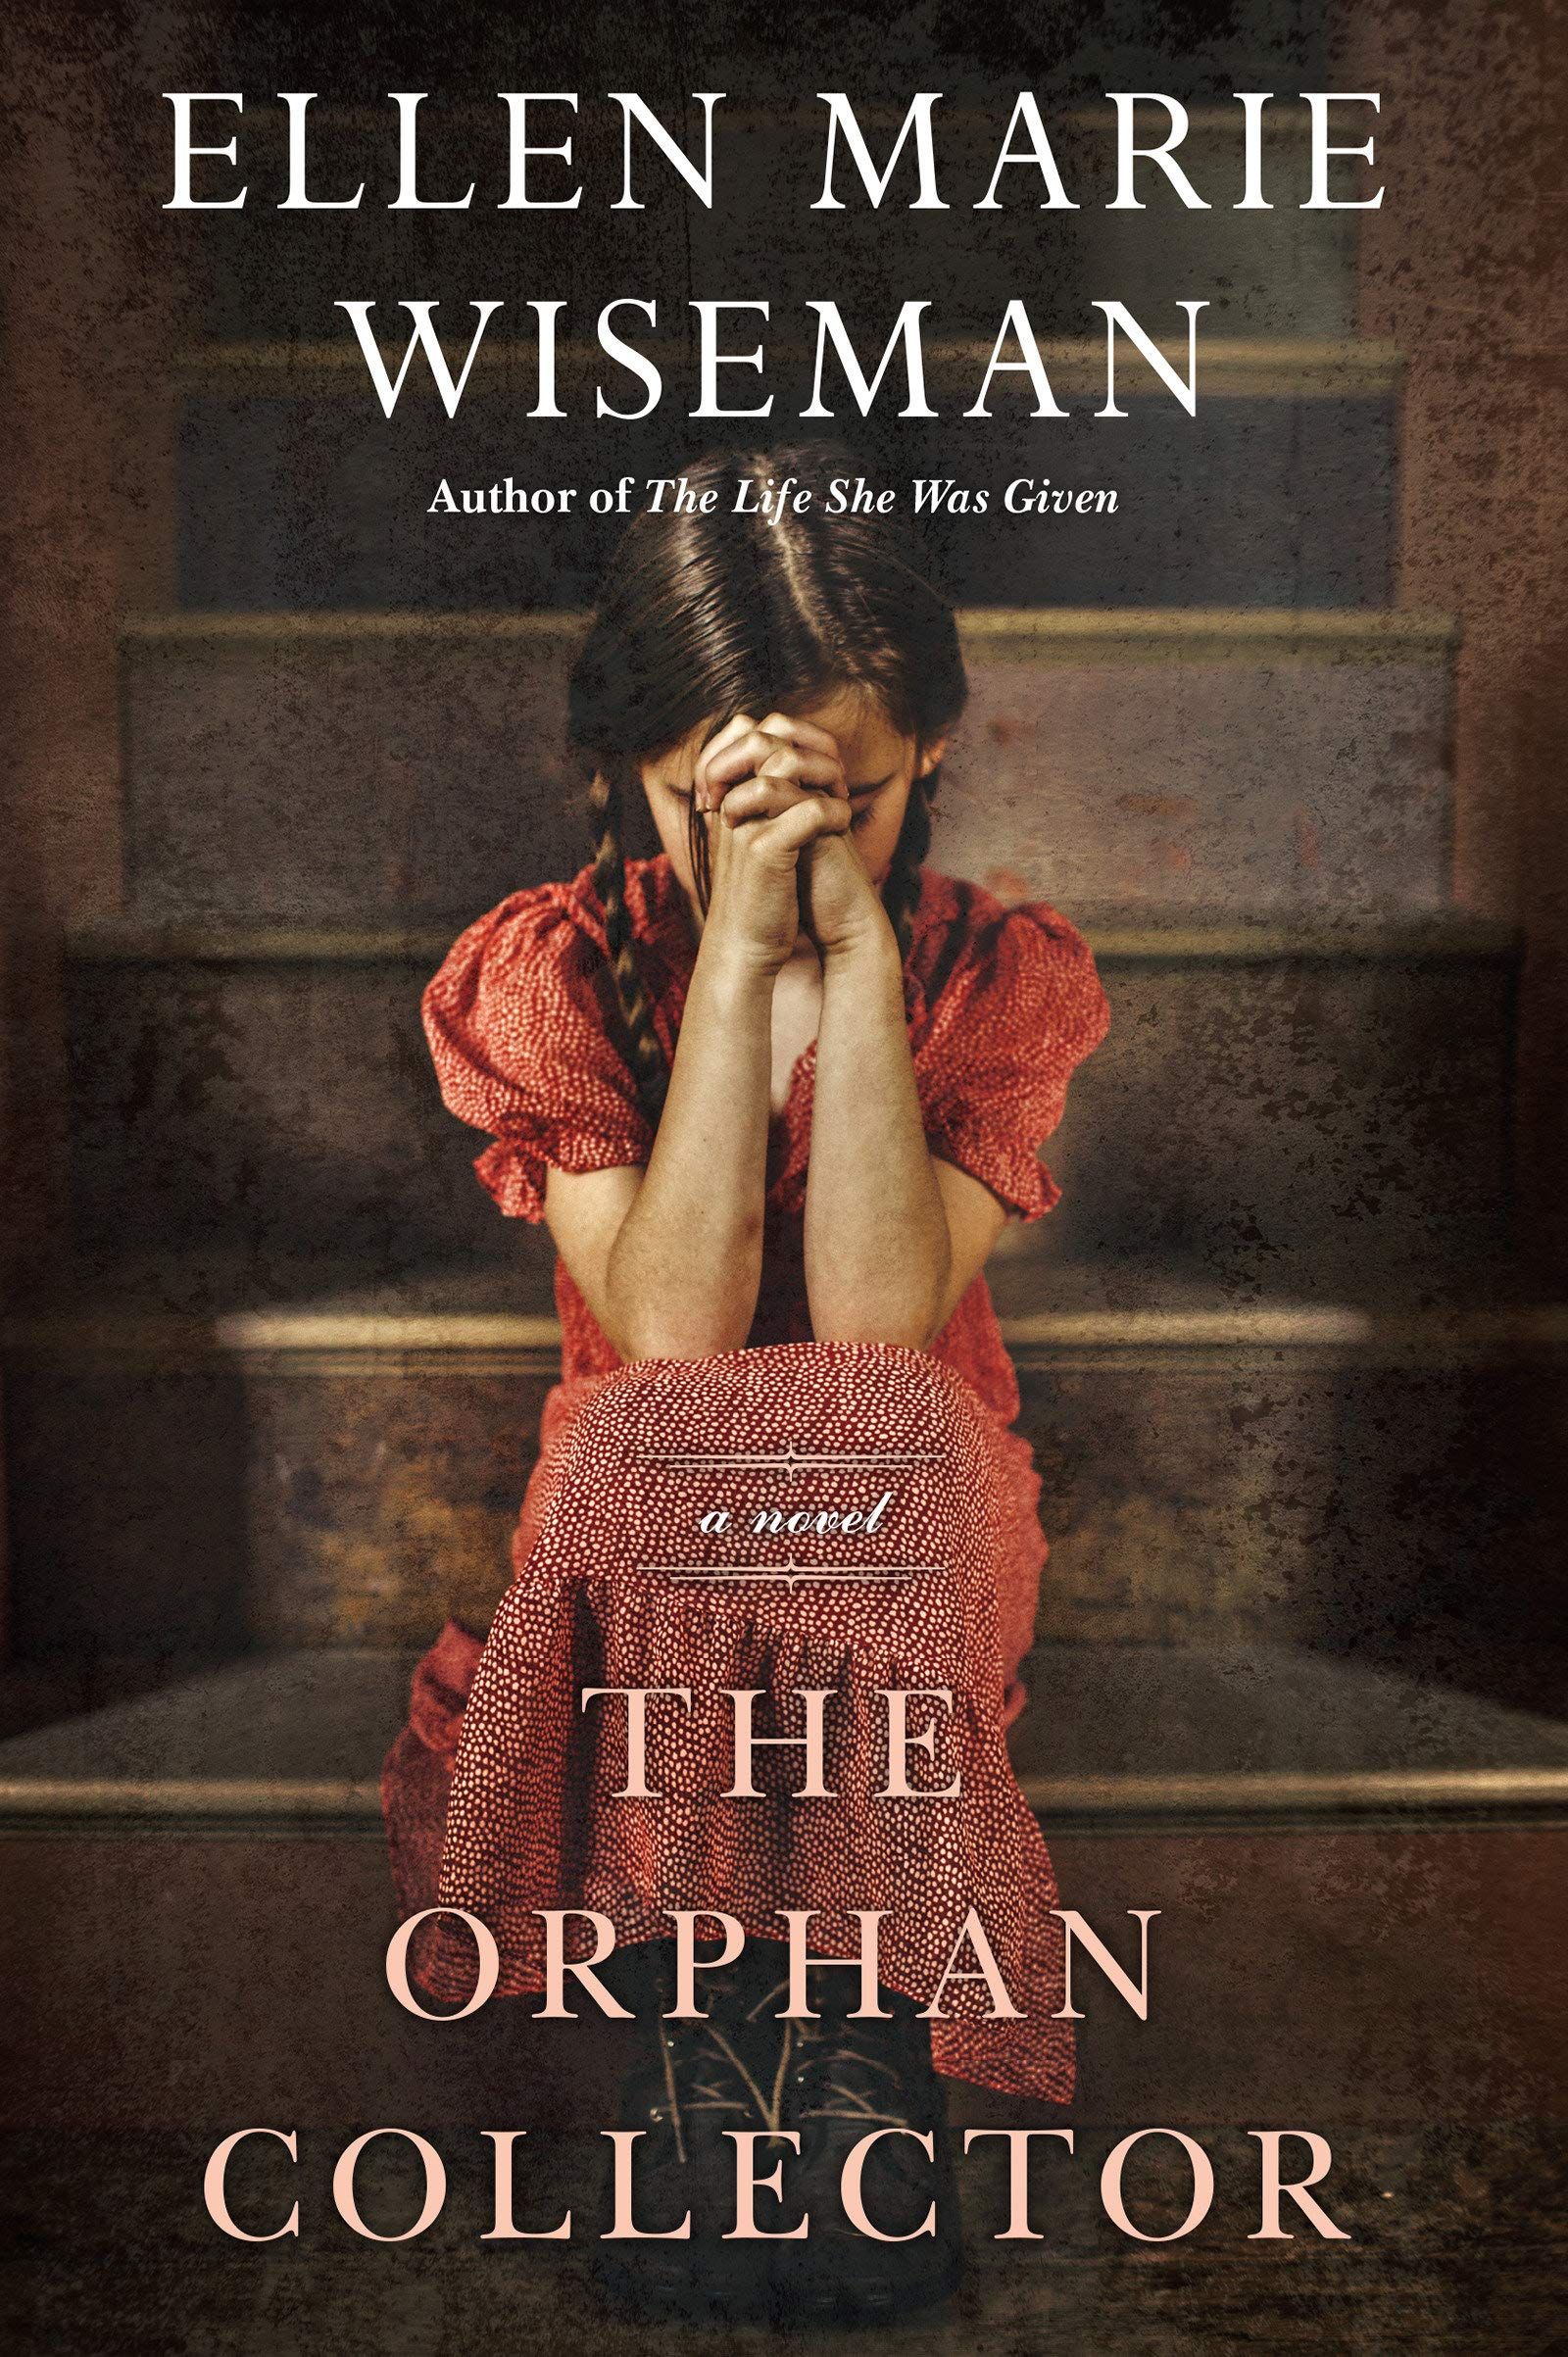 The Orphan Collector by Ellen Marie Wiseman Goodreads Books, Book